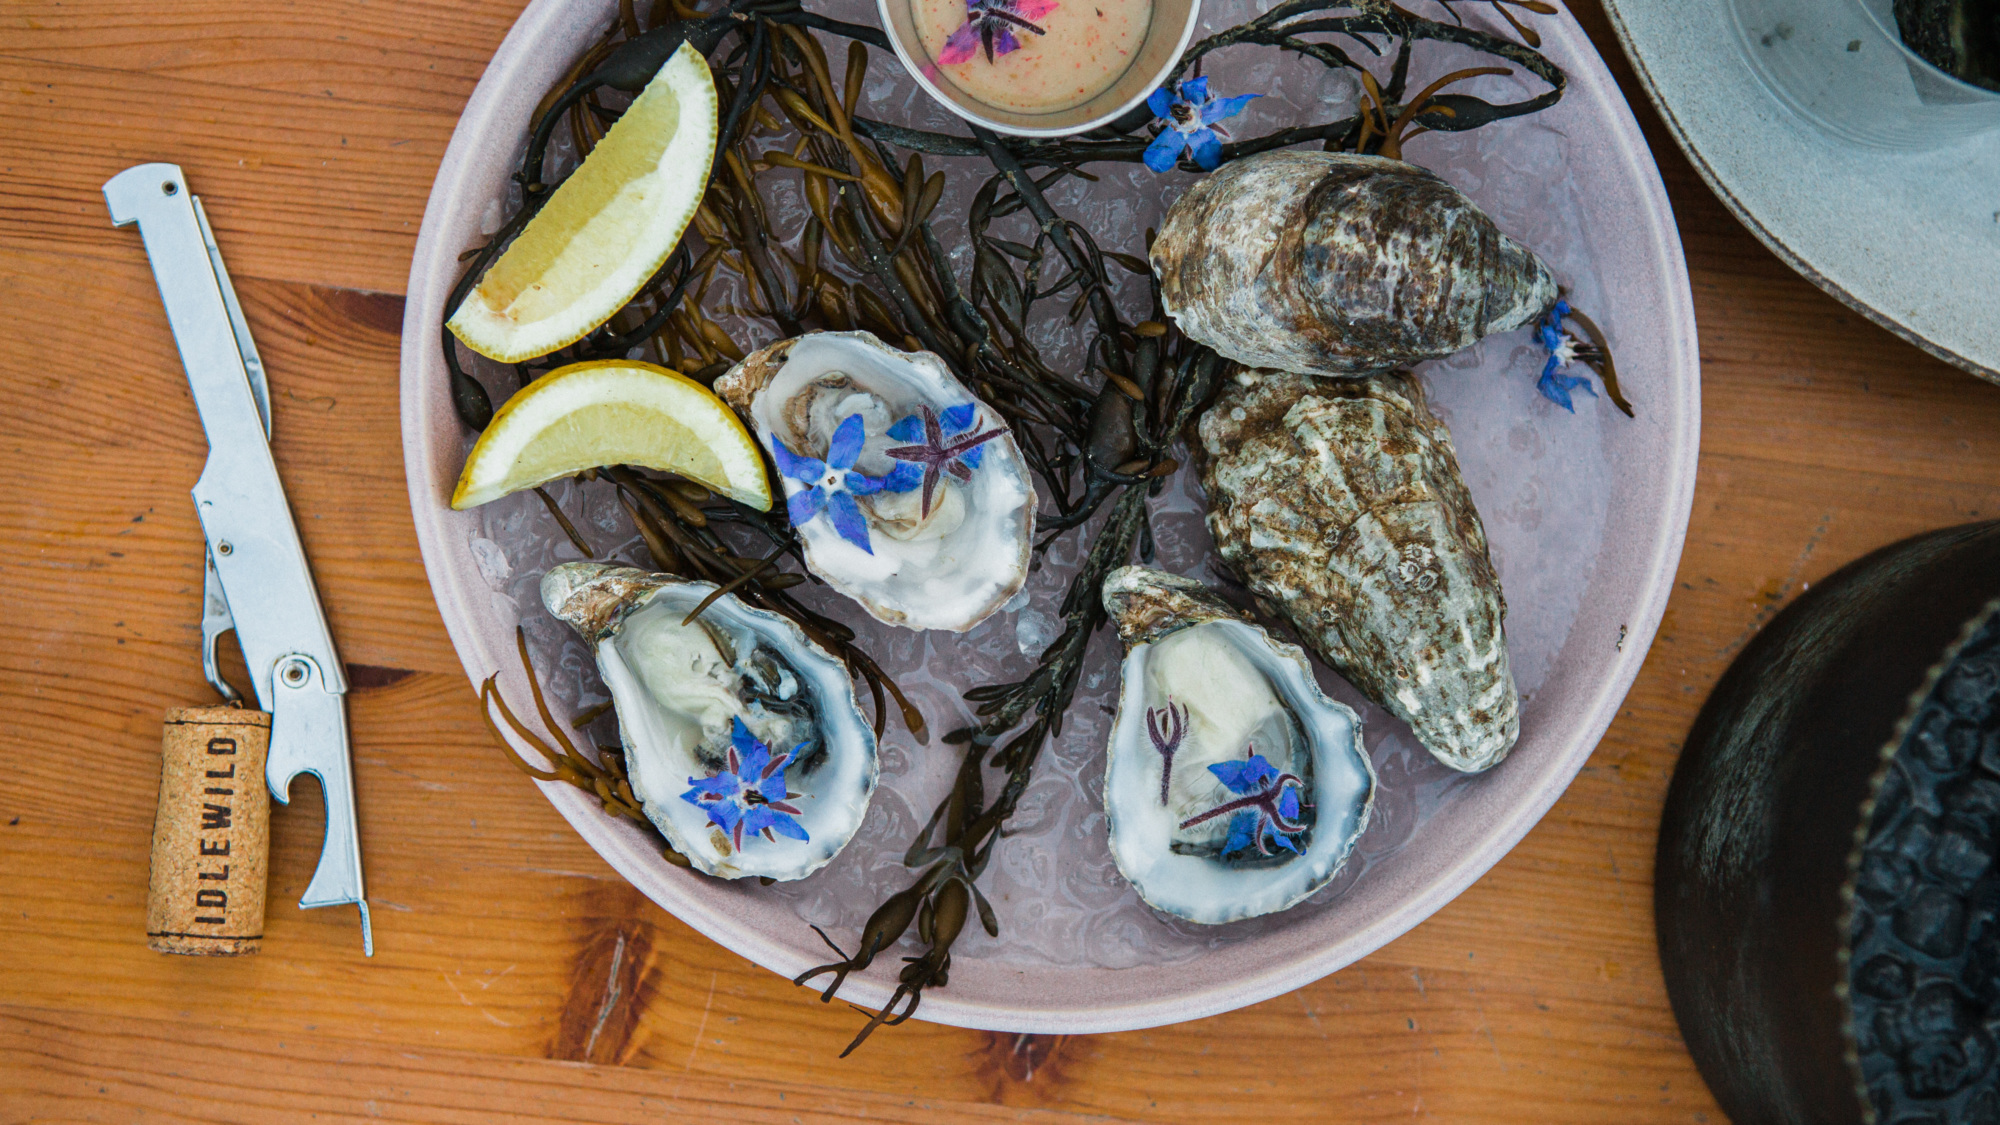 Oysters from Bella Dea, a new sustainable seafood spot from the same team behind LA's Crudo e Nudo.